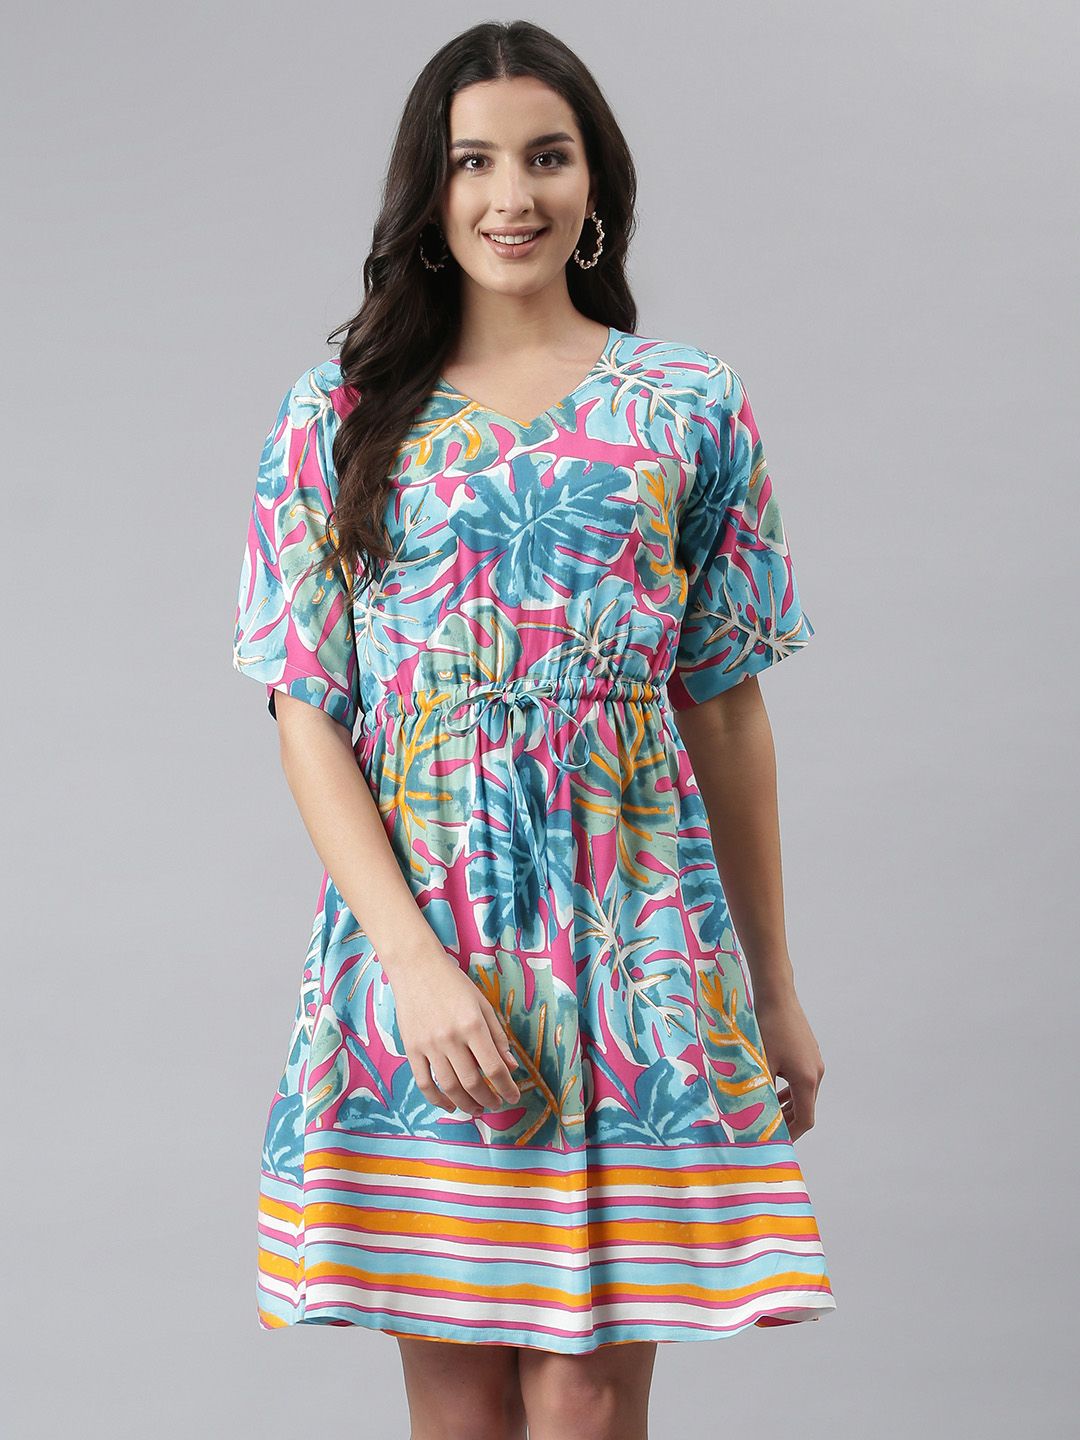 DEEBACO Turquoise Blue & Pink Tropical Print Cotton Dress Price in India